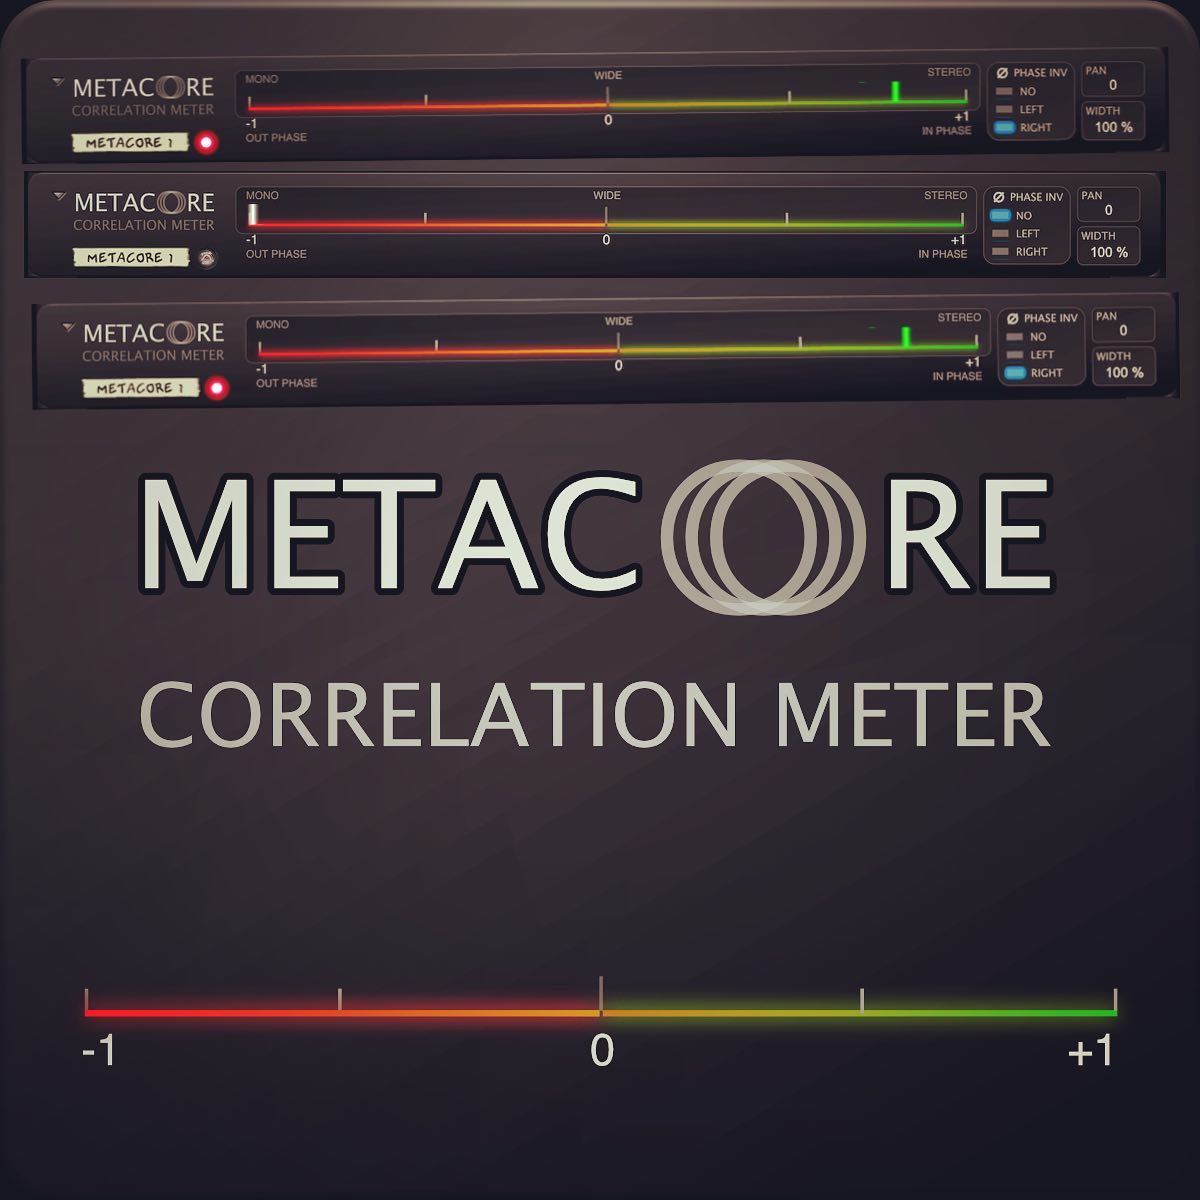 “MetaCore” is an intuitive correlation meter which shows how much your signals are in-phase or out-of-phase. 
The device not only detects out-of-phase signal problems but also gives phase manipulations options to help in fixing them. PAN and WIDTH controls are also included for further tweaking of your signal.

Correlation meter is one of the “must have” utilities for mastering, pinpointing issues with stereo or mono signals and helping in controlling and fixing “out of phase” problems.

https://www.reasonstudios.com/shop/rack-extension/metacore-correlation-meter/
#metacore #meta #core #correlation #meter #audio #phase #invert #fix #rackextension #reasonrackios #reasonstudios #turn2on #mastering #reasonrack